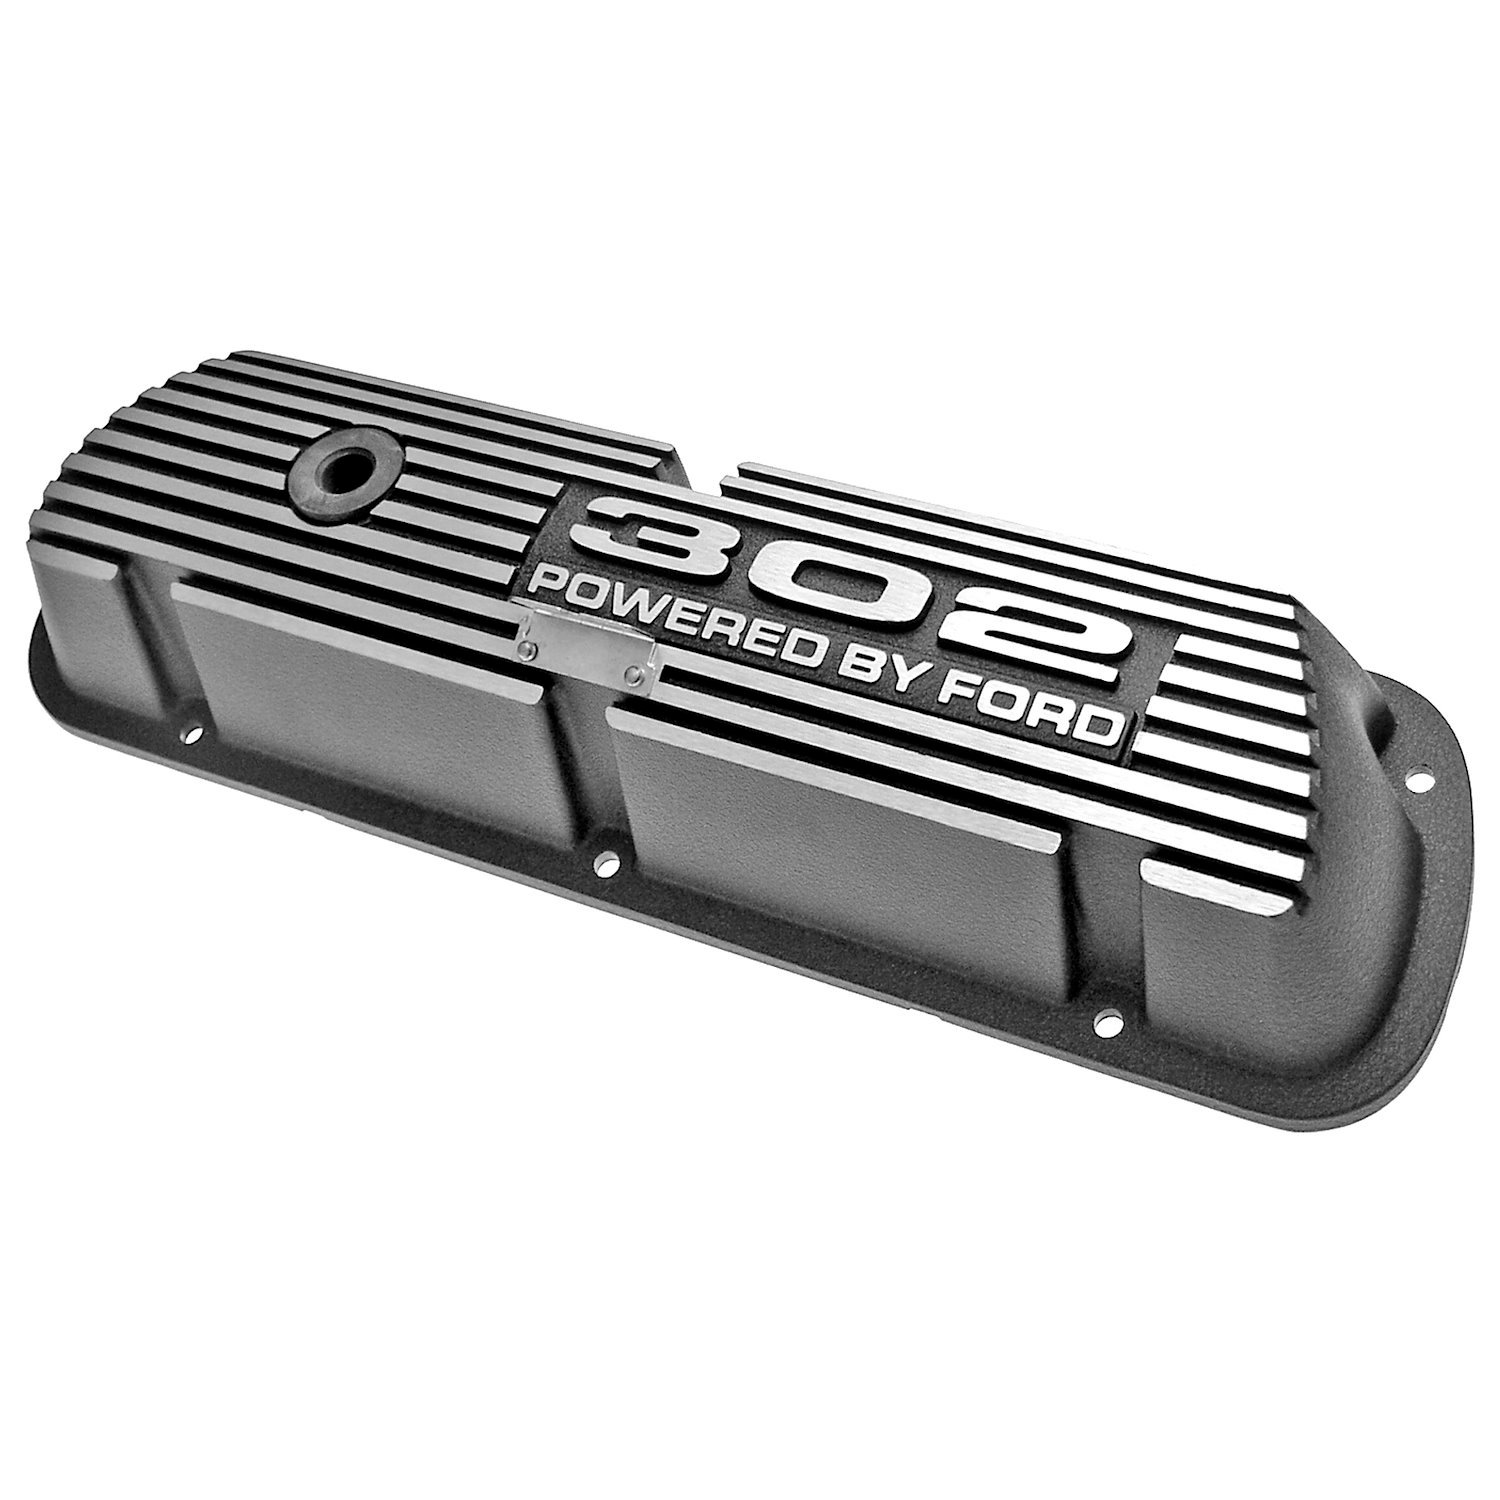 Custom Valve Covers for Ford 302 Engines